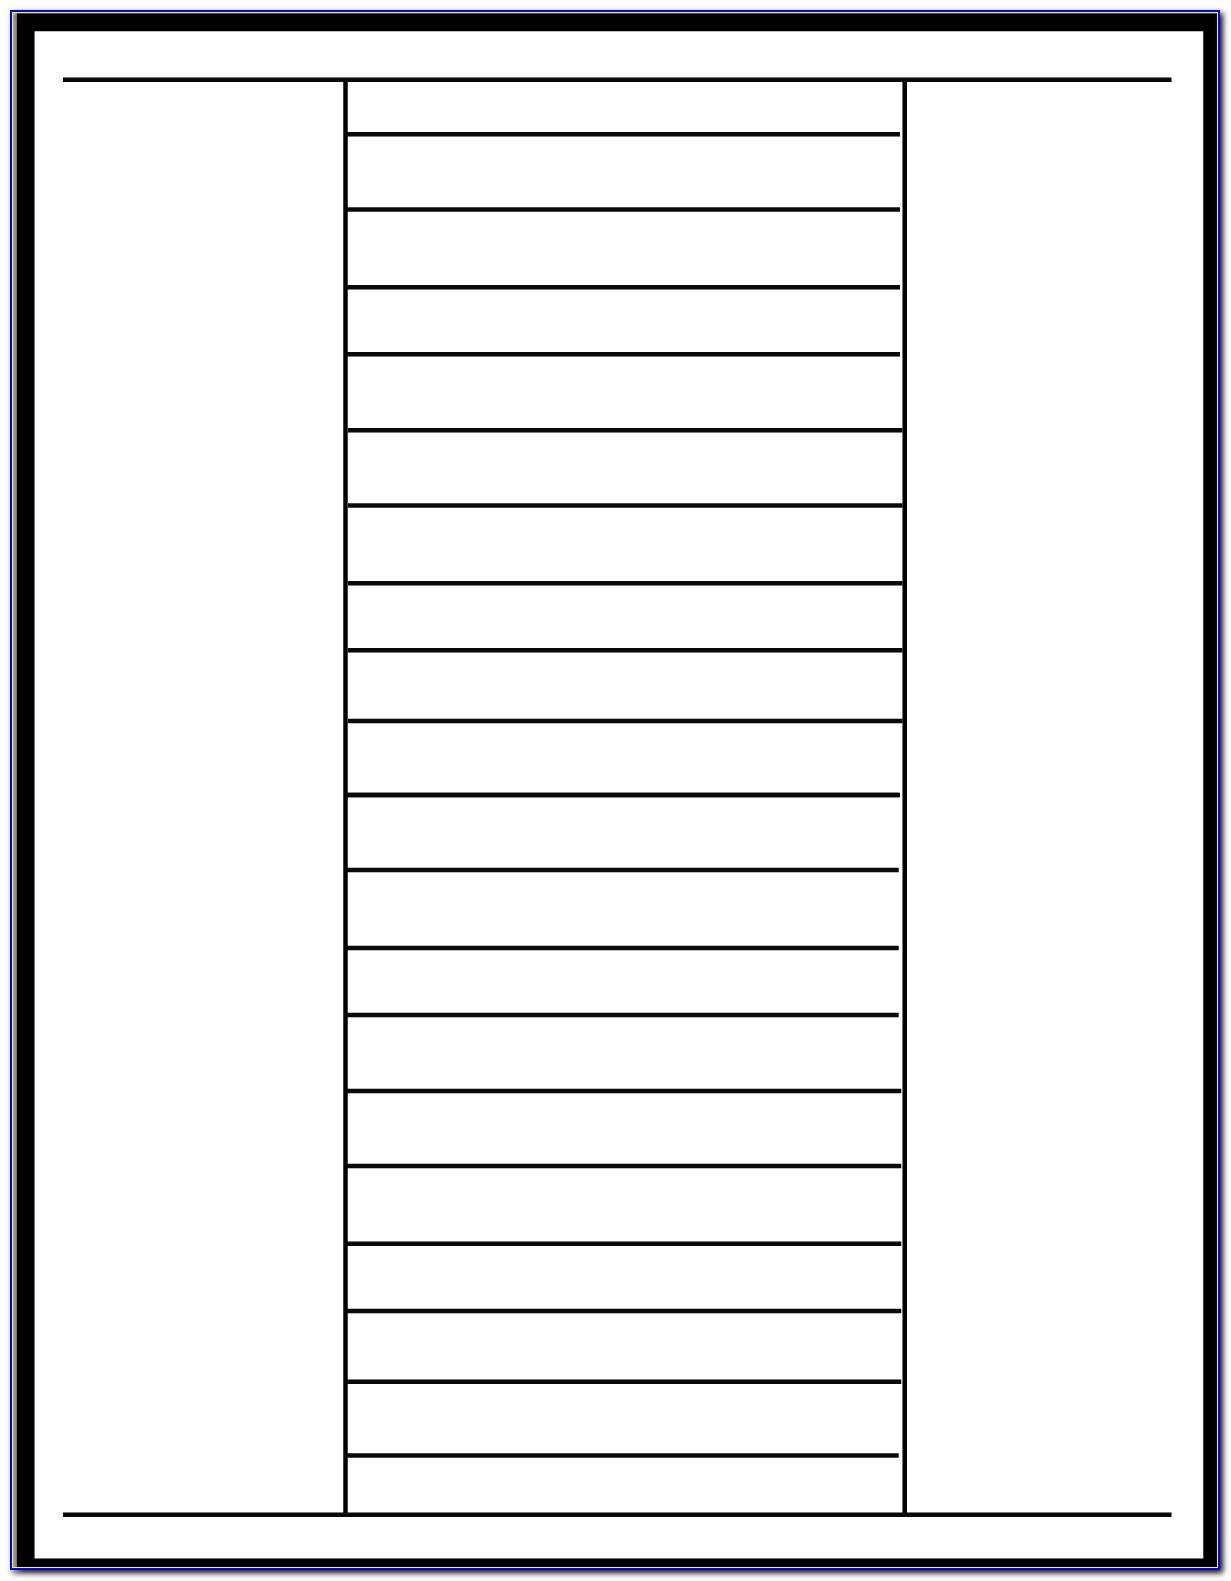 Divider Tabs Template For Binders